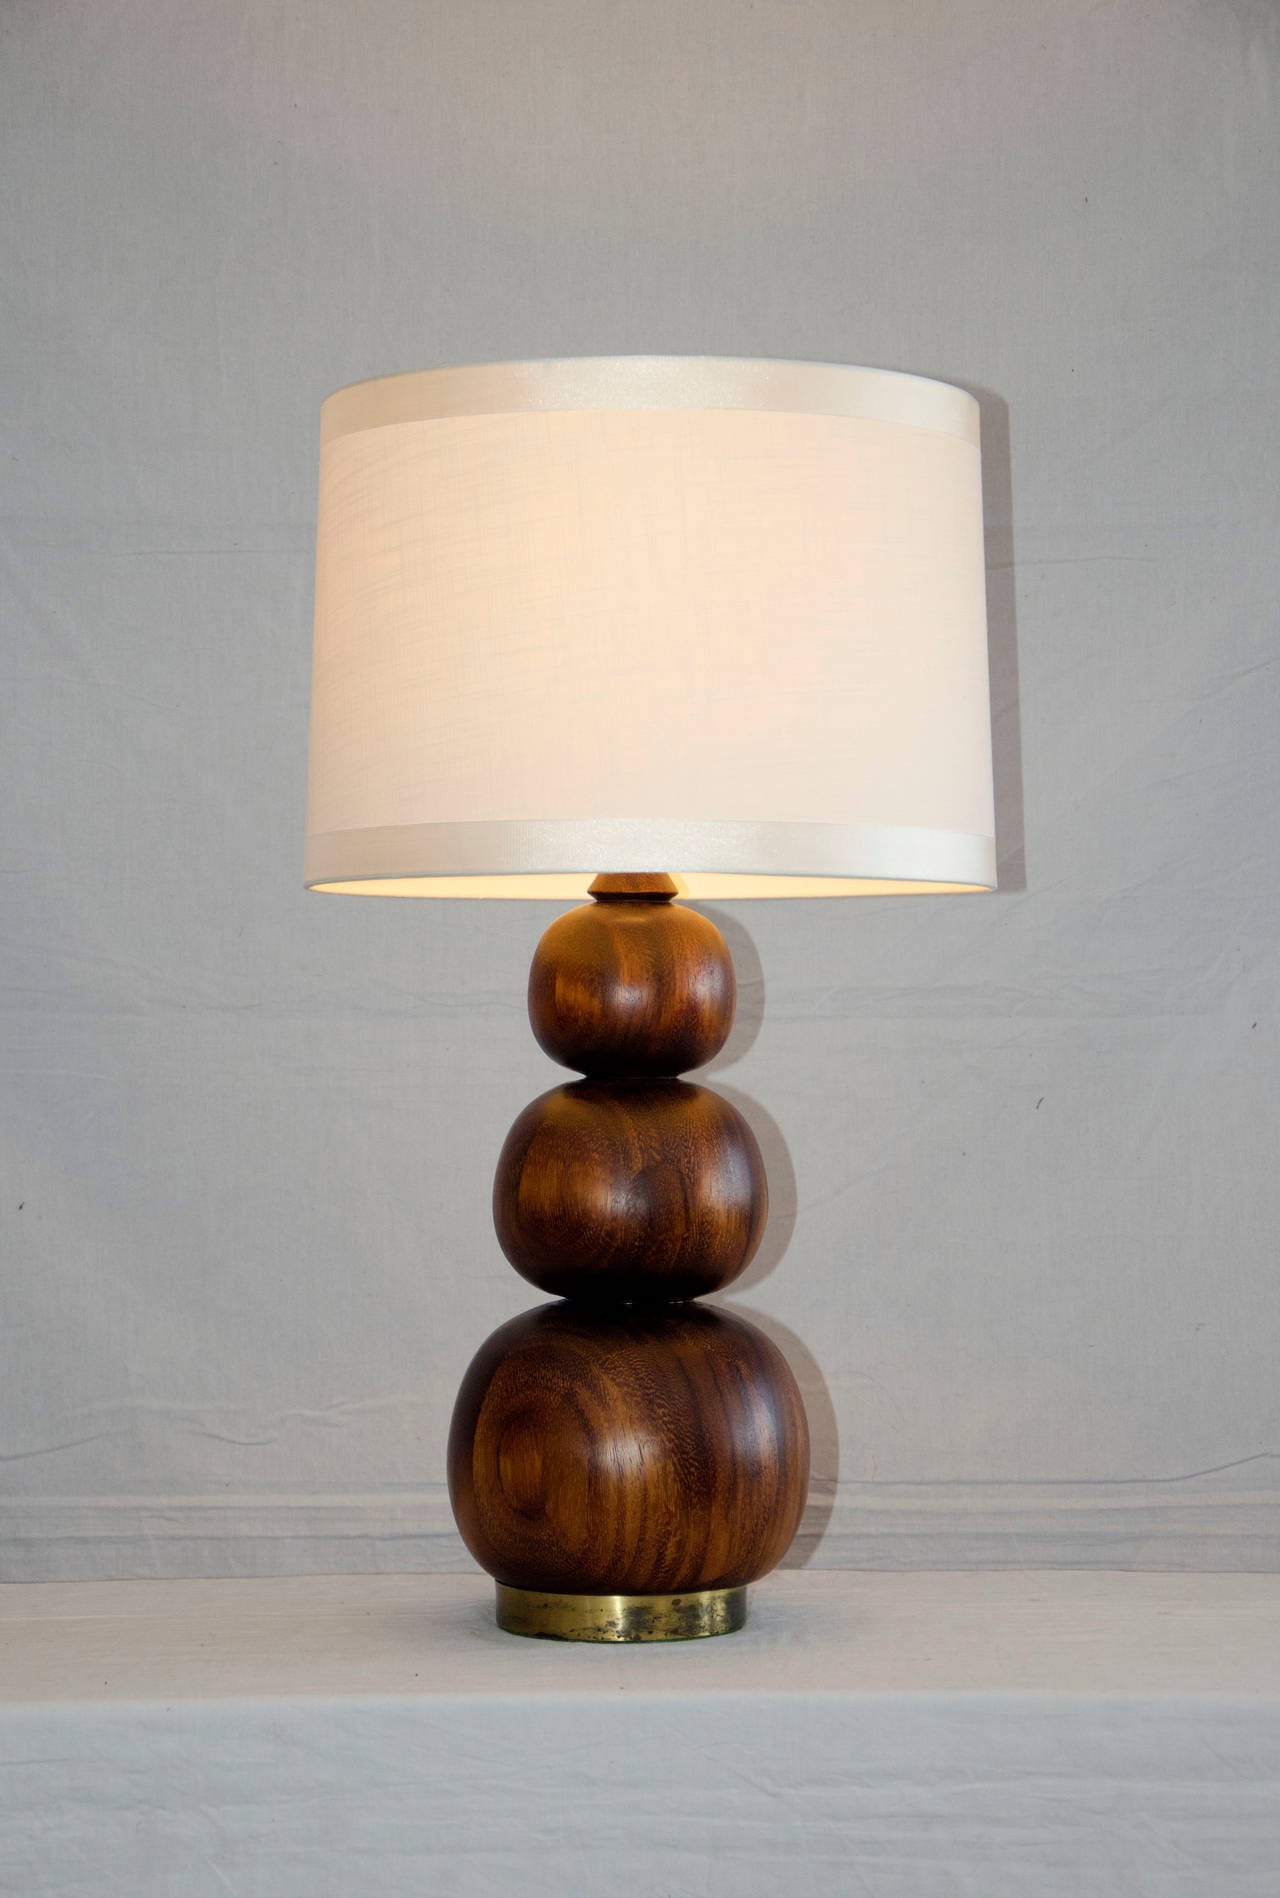 Unusual walnut lamp base consisting of three graduated size wood balls  attached to a 1